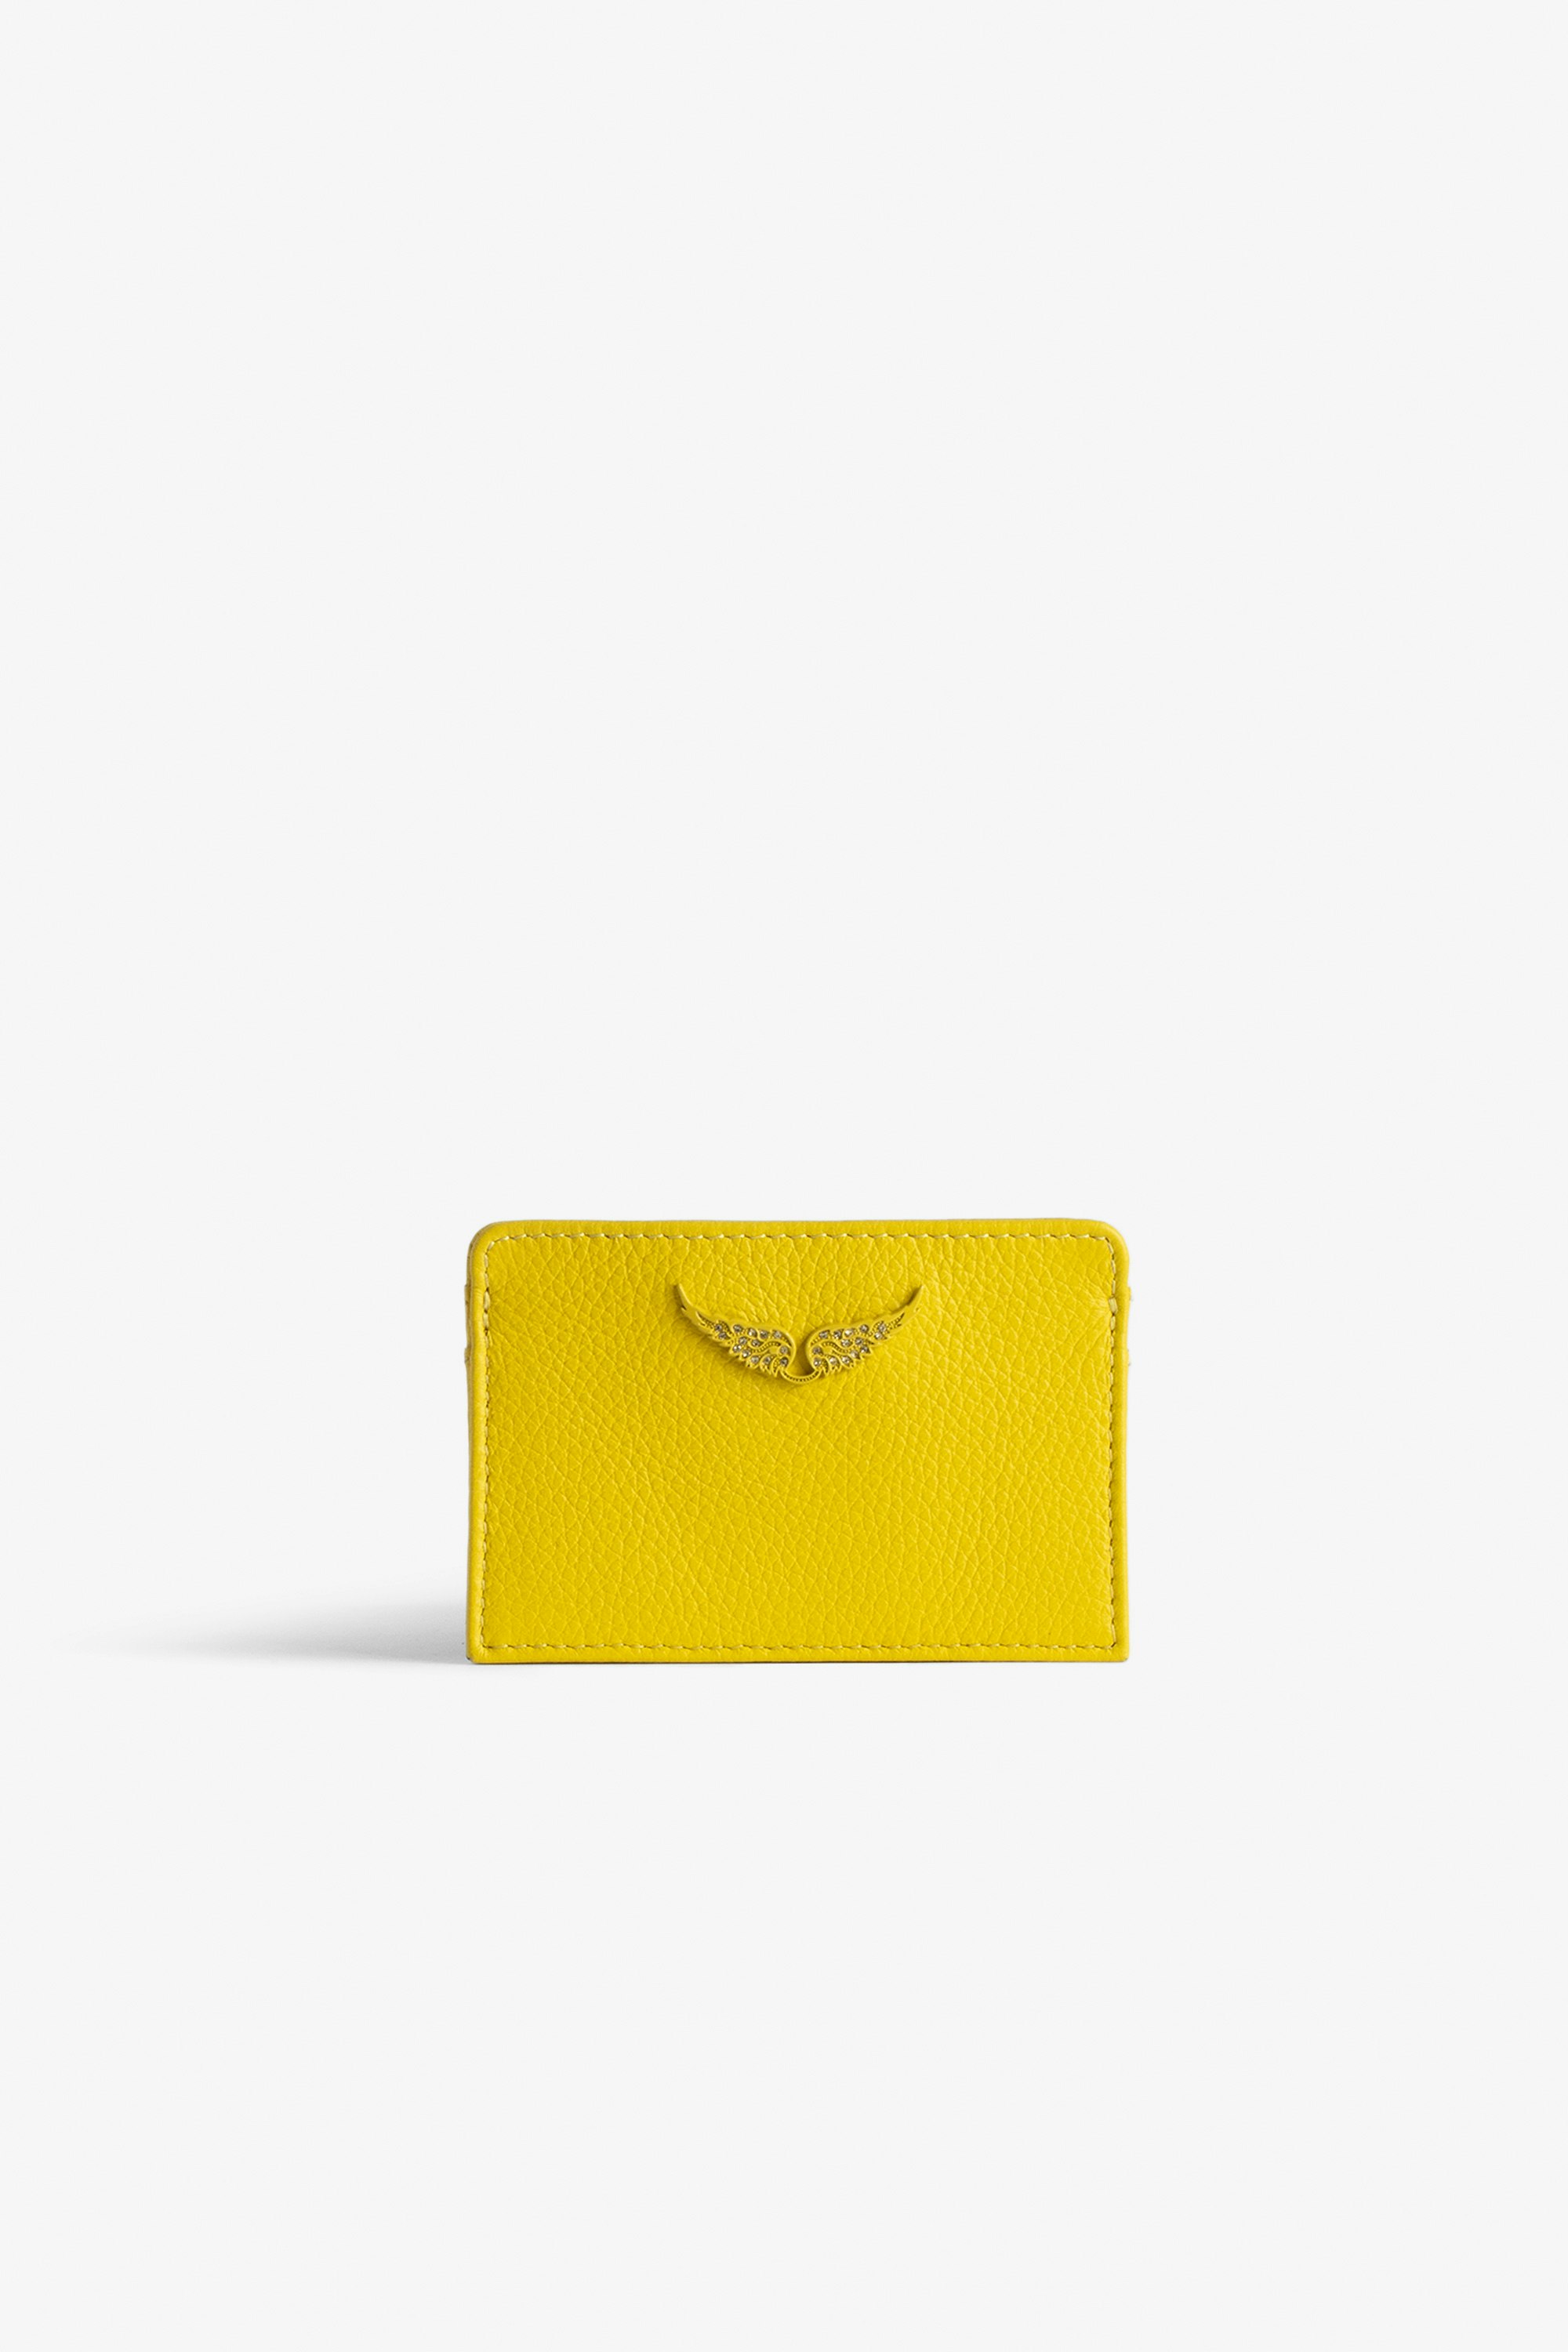 ZV Pass Card Holder - Women’s yellow grained leather card holder with diamanté wings charm.